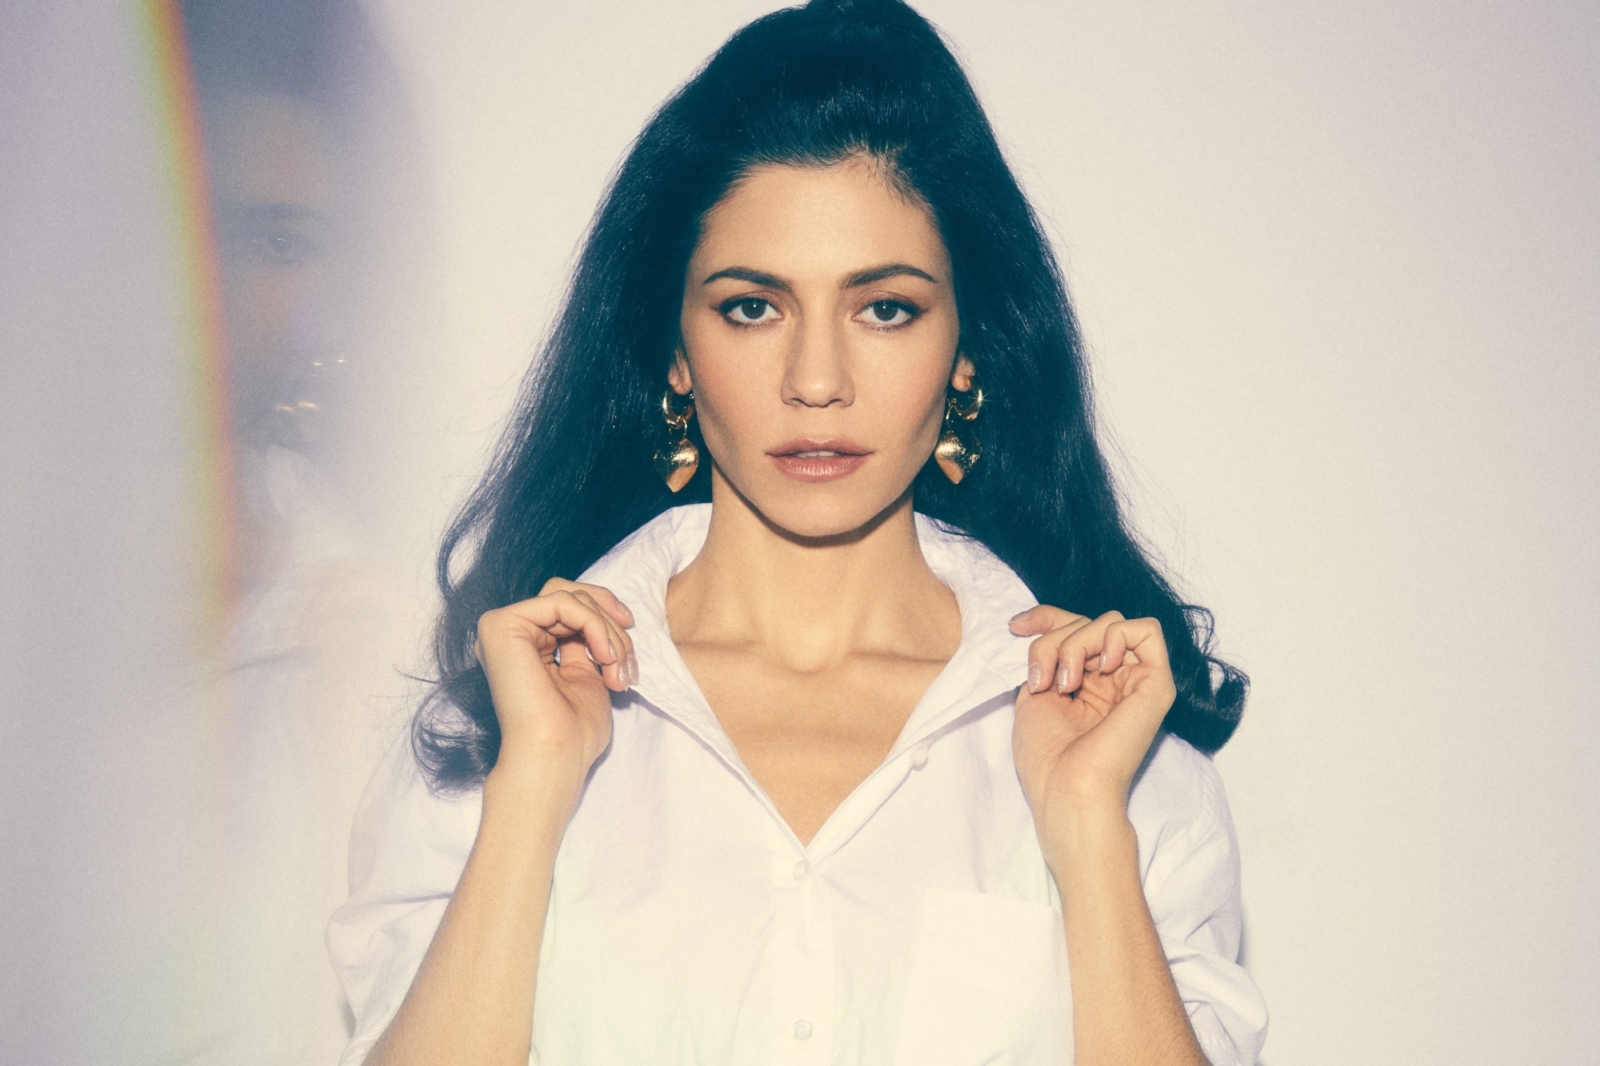 Marina joins the line-up for Portugal's NOS Alive festival